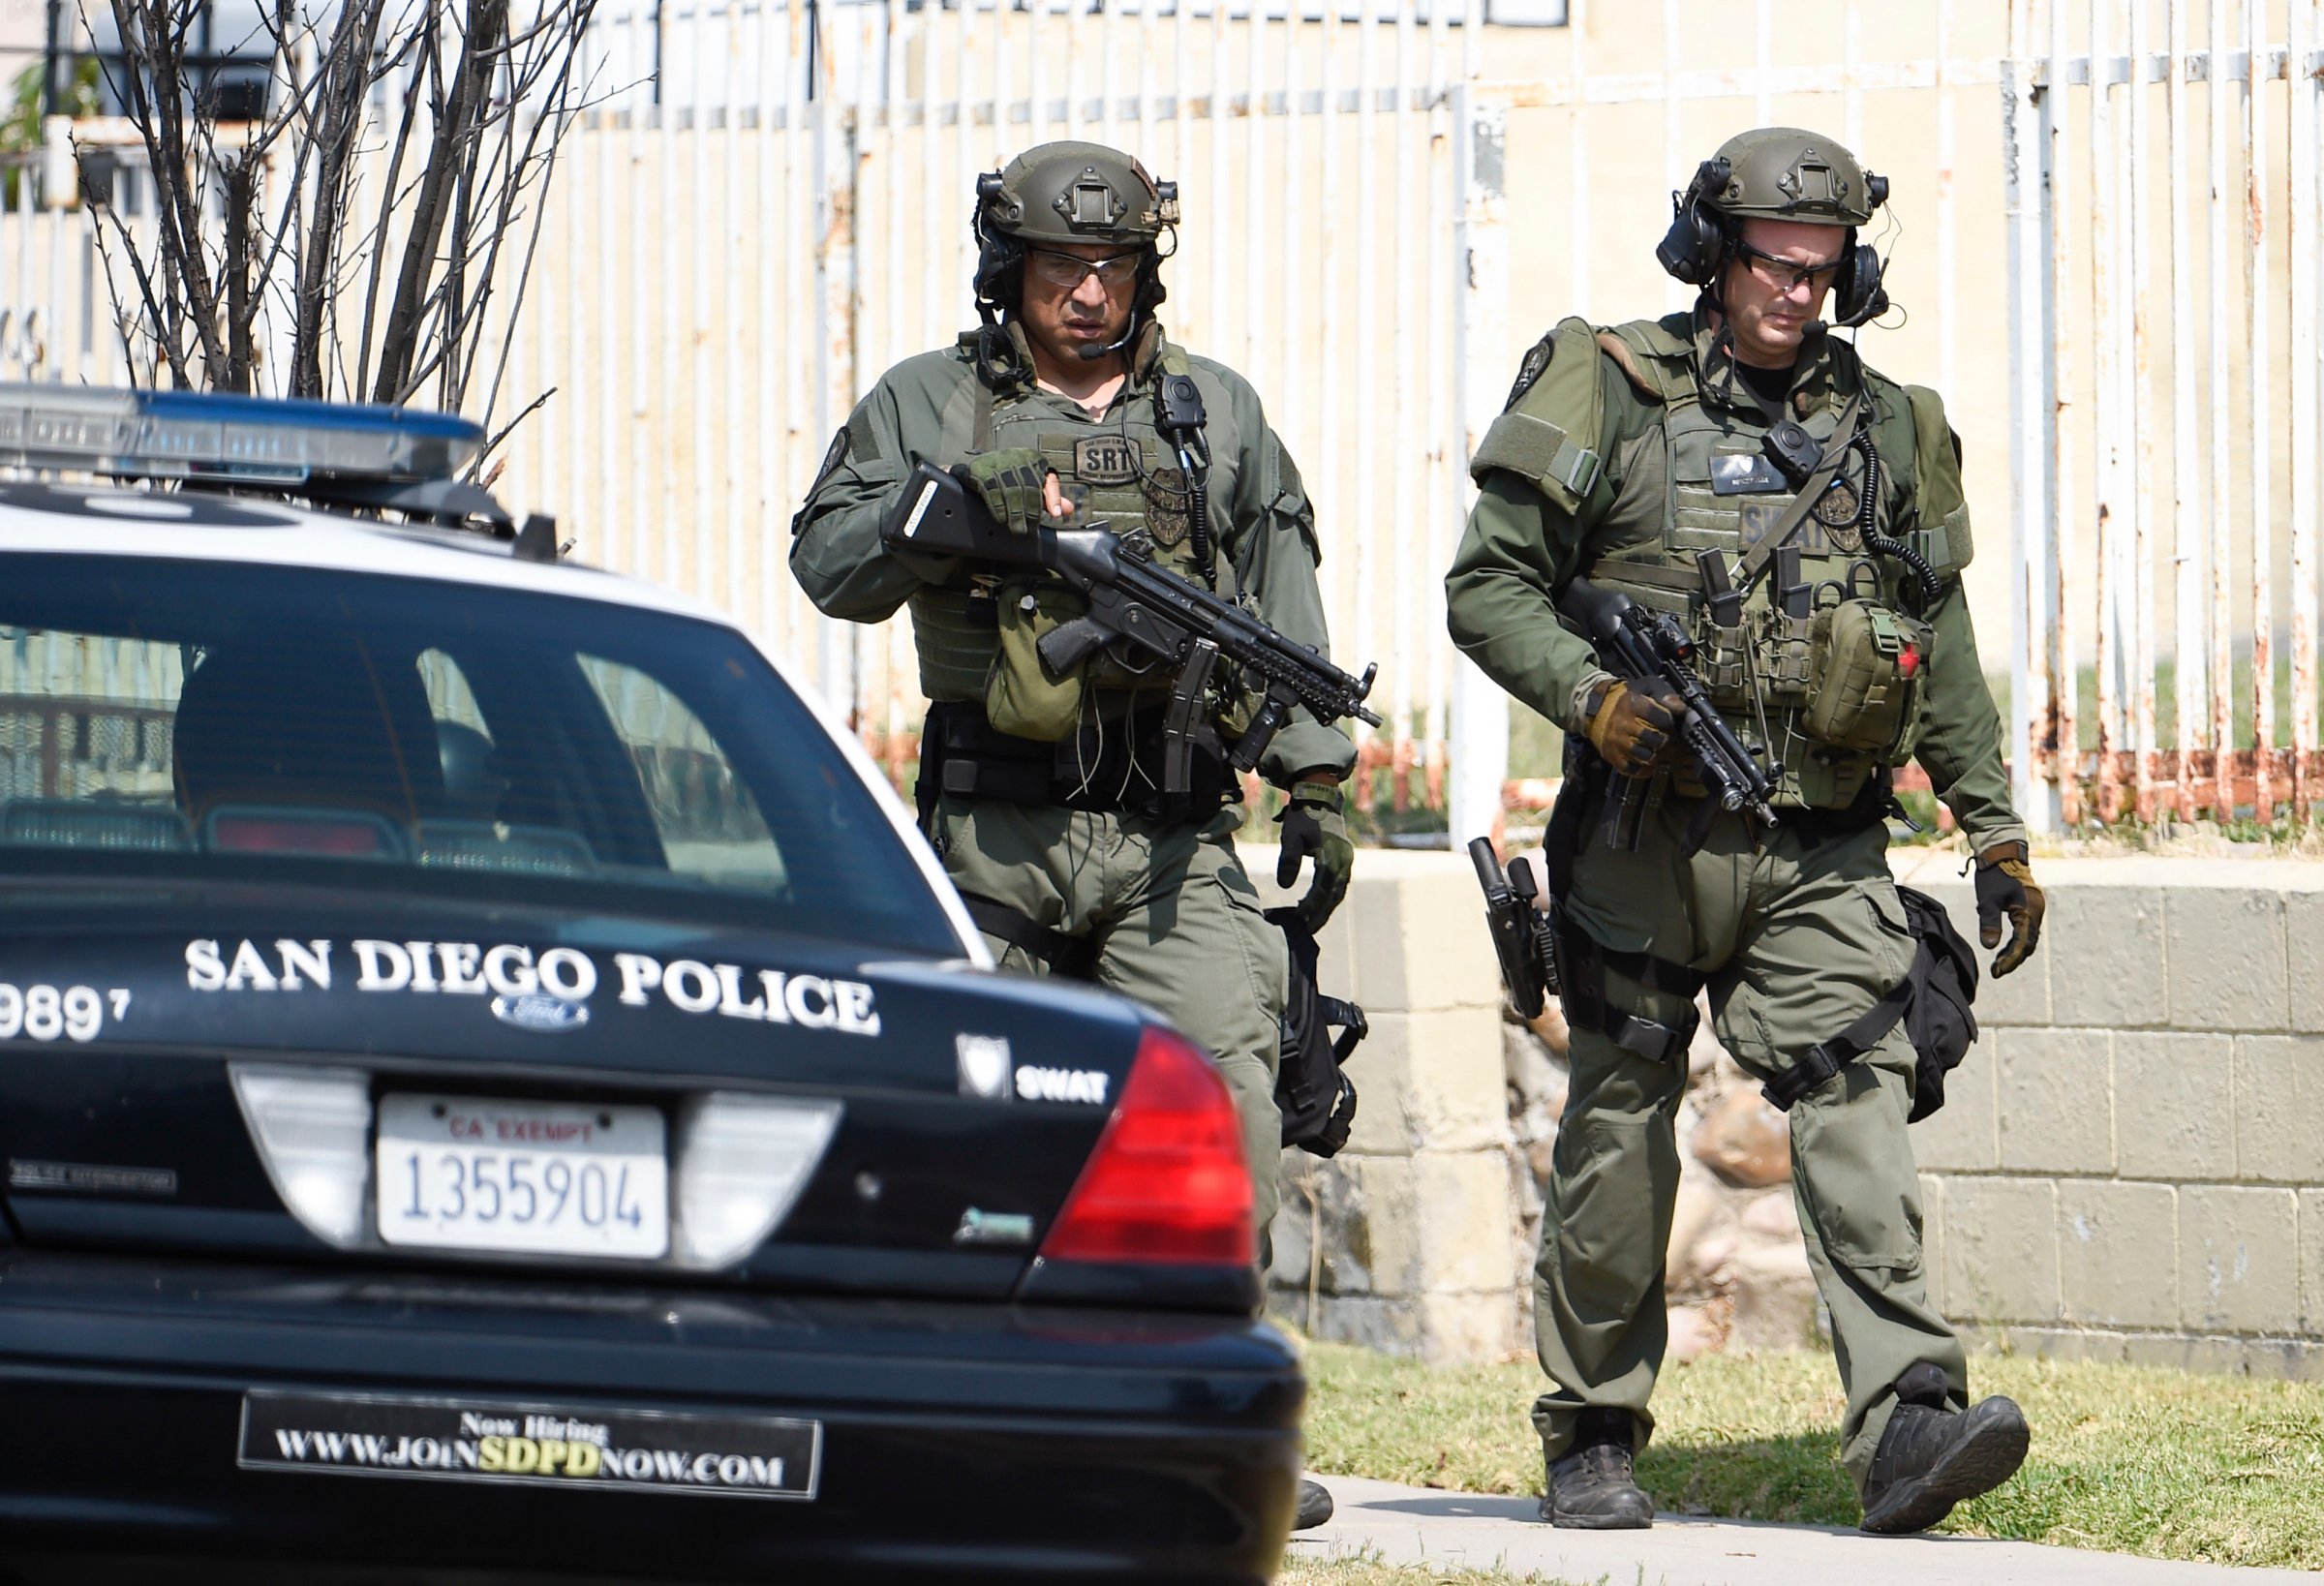 San Diego Police SWAT officers walk down the street after entering a house with a possible suspect inside, on July 29, 2016, in San Diego.